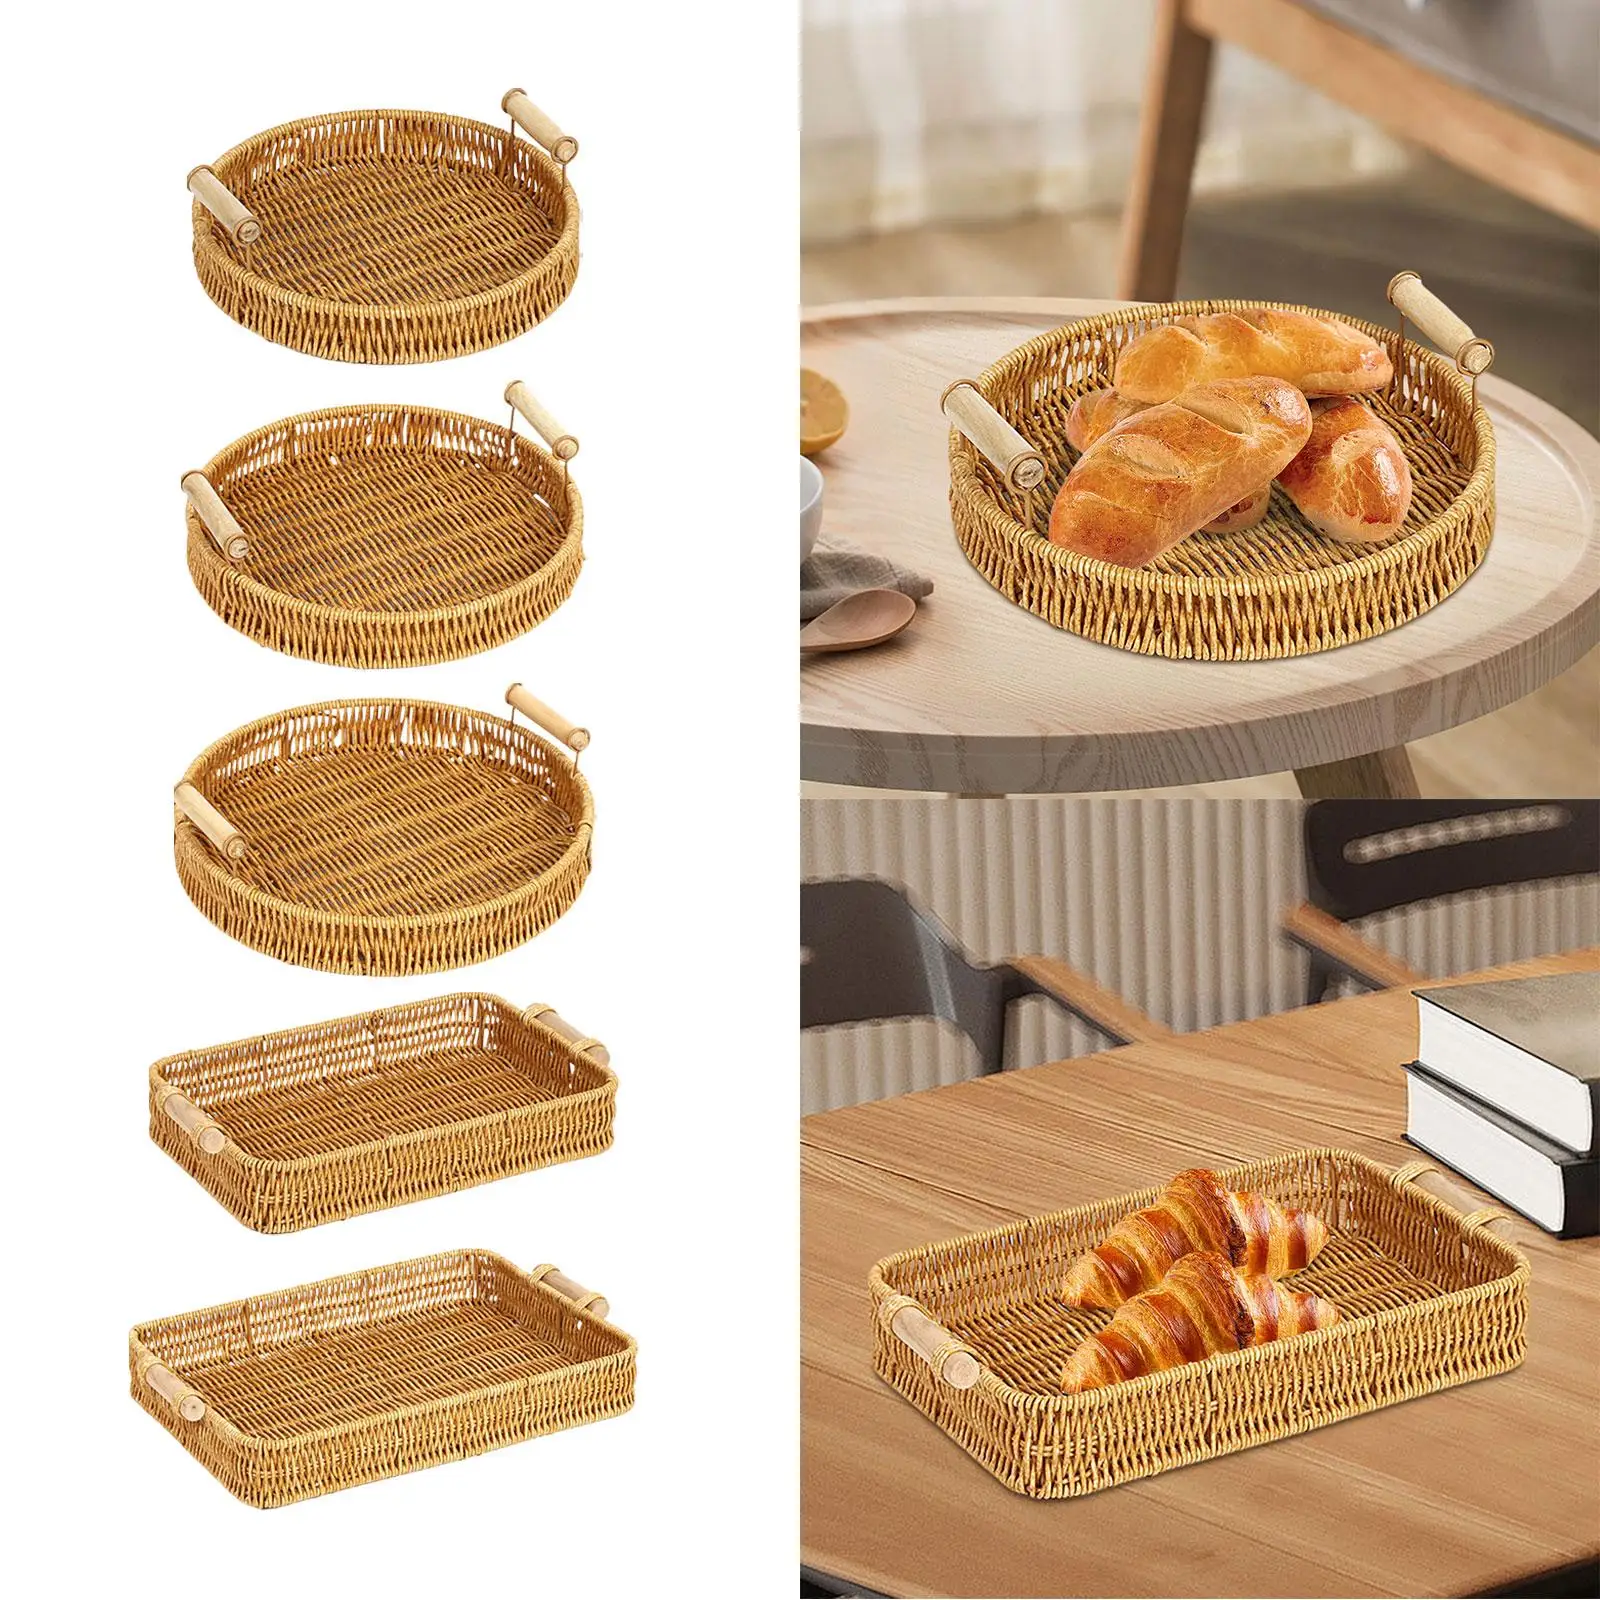 Food Serving Baskets Coffee Table Decor Snack Serving Bowl Food Organizer Tray for Camping Bedroom Party Living Room Picnic